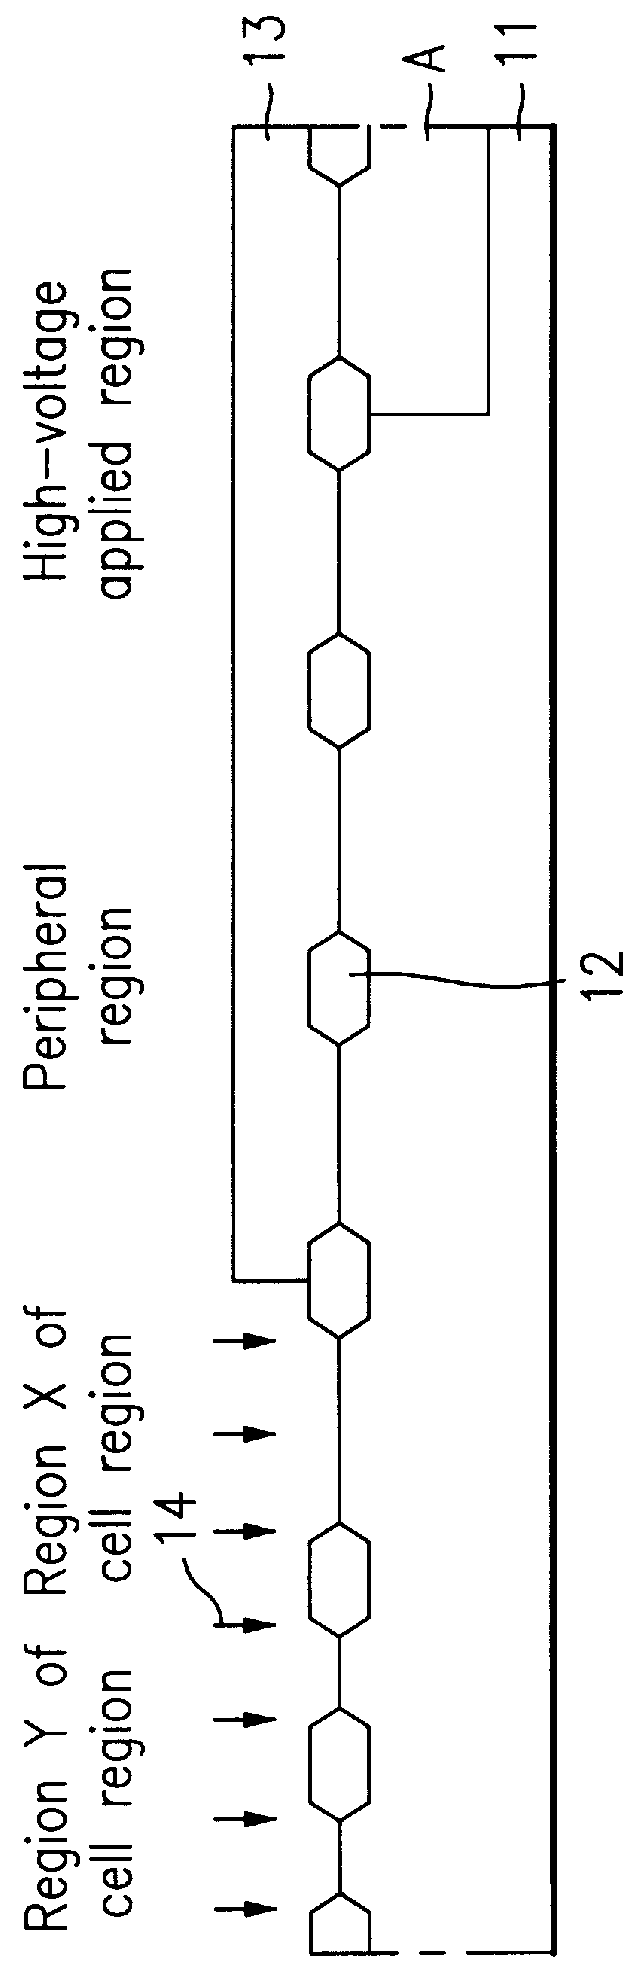 Method of manufacturing semiconductor device comprising high voltage regions and floating gates